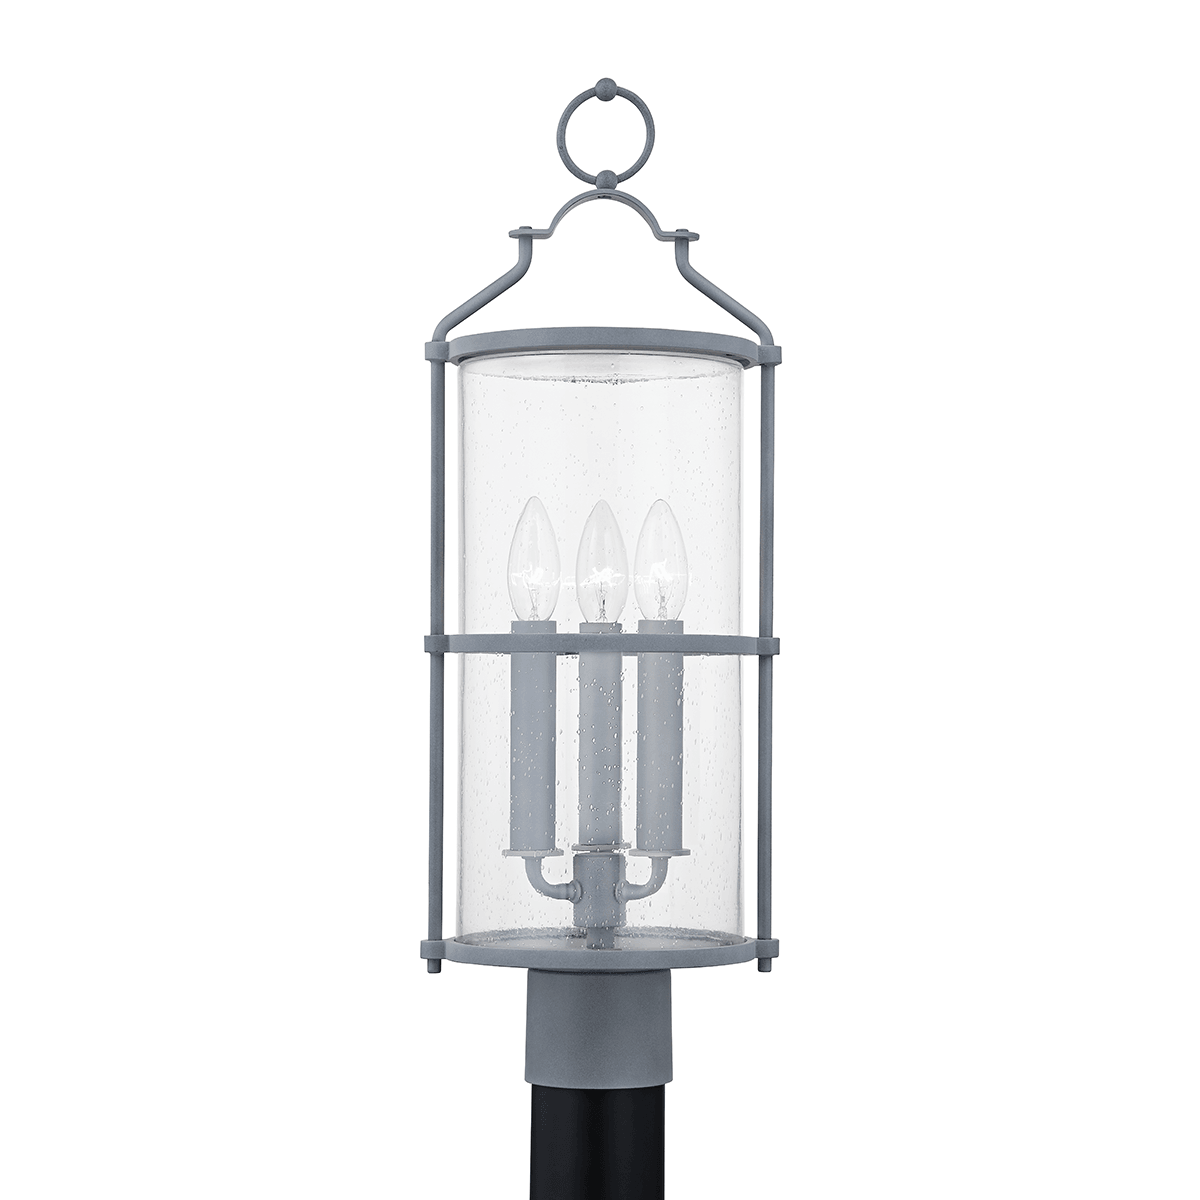 Steel with Clear Seedy Glass Shade Outdoor Pendant - LV LIGHTING